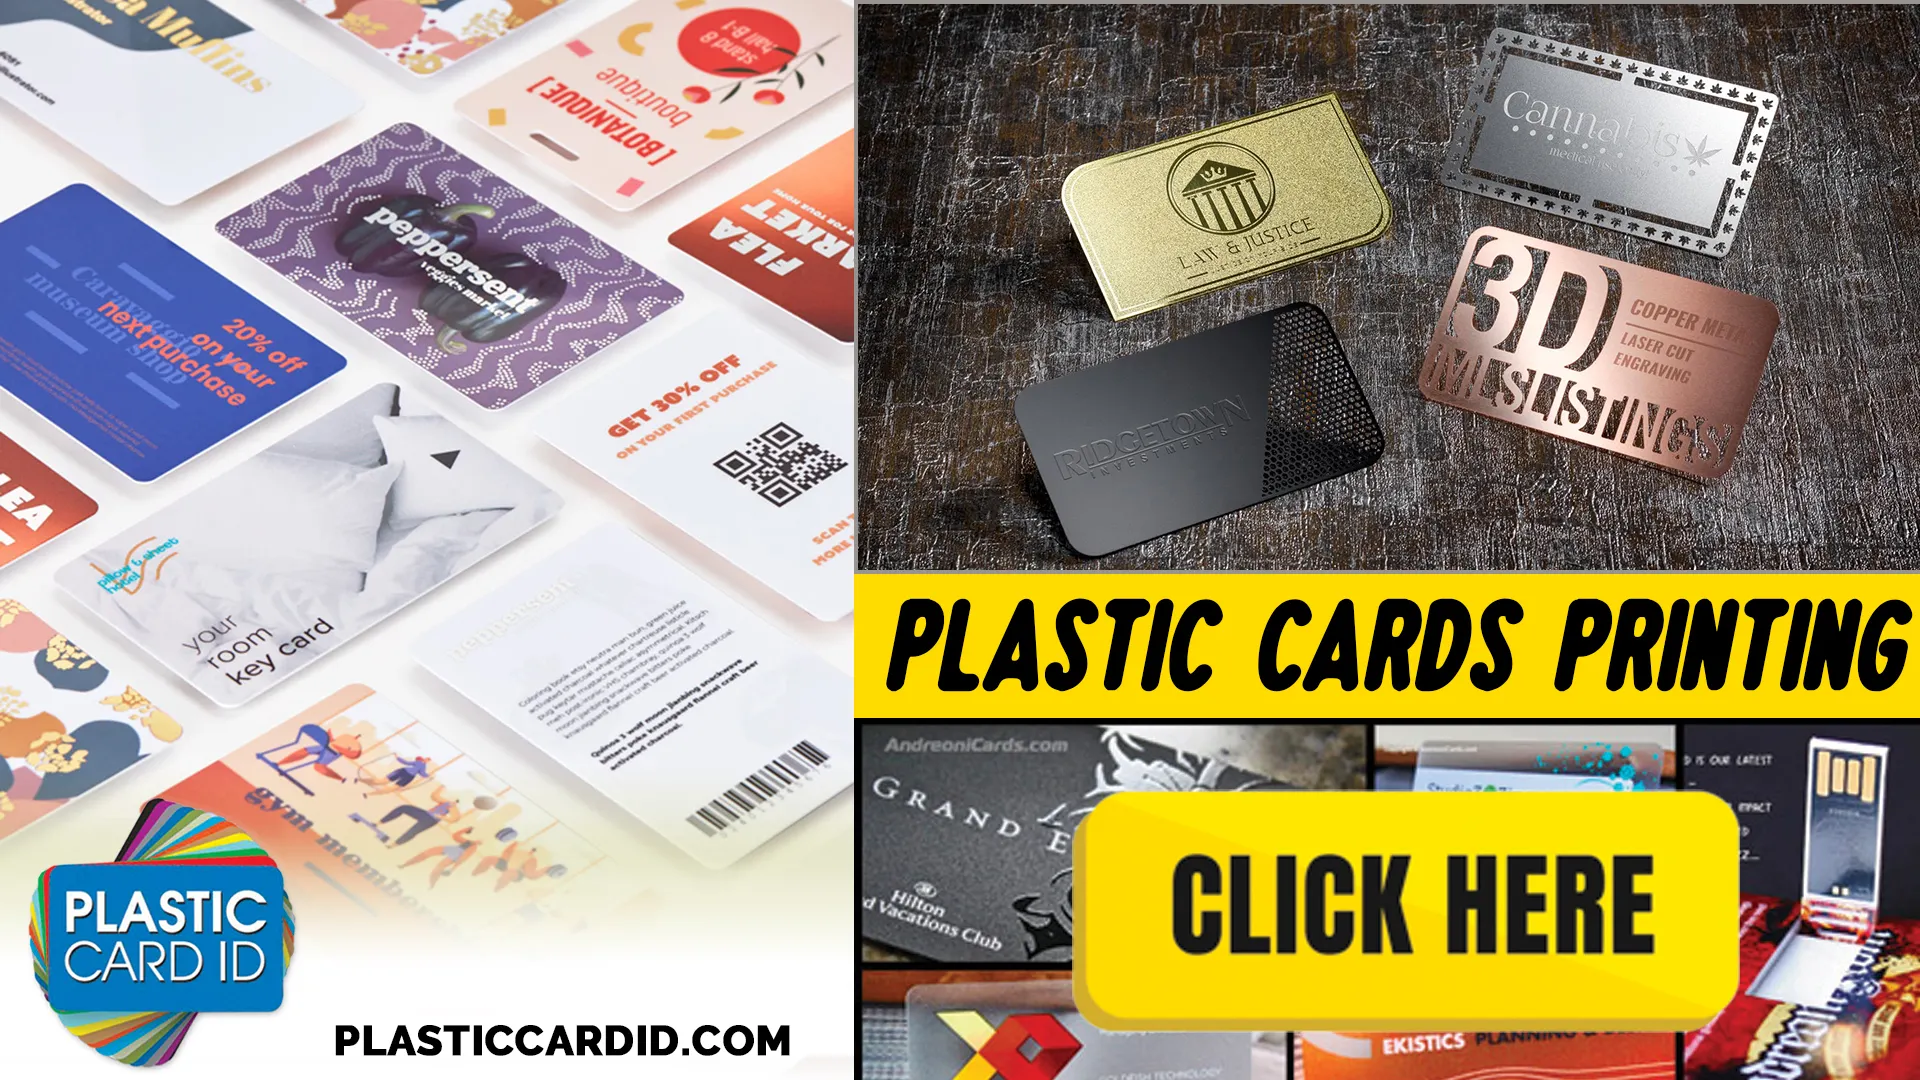 Embrace Your Brand's True Colors with Plastic Card ID
